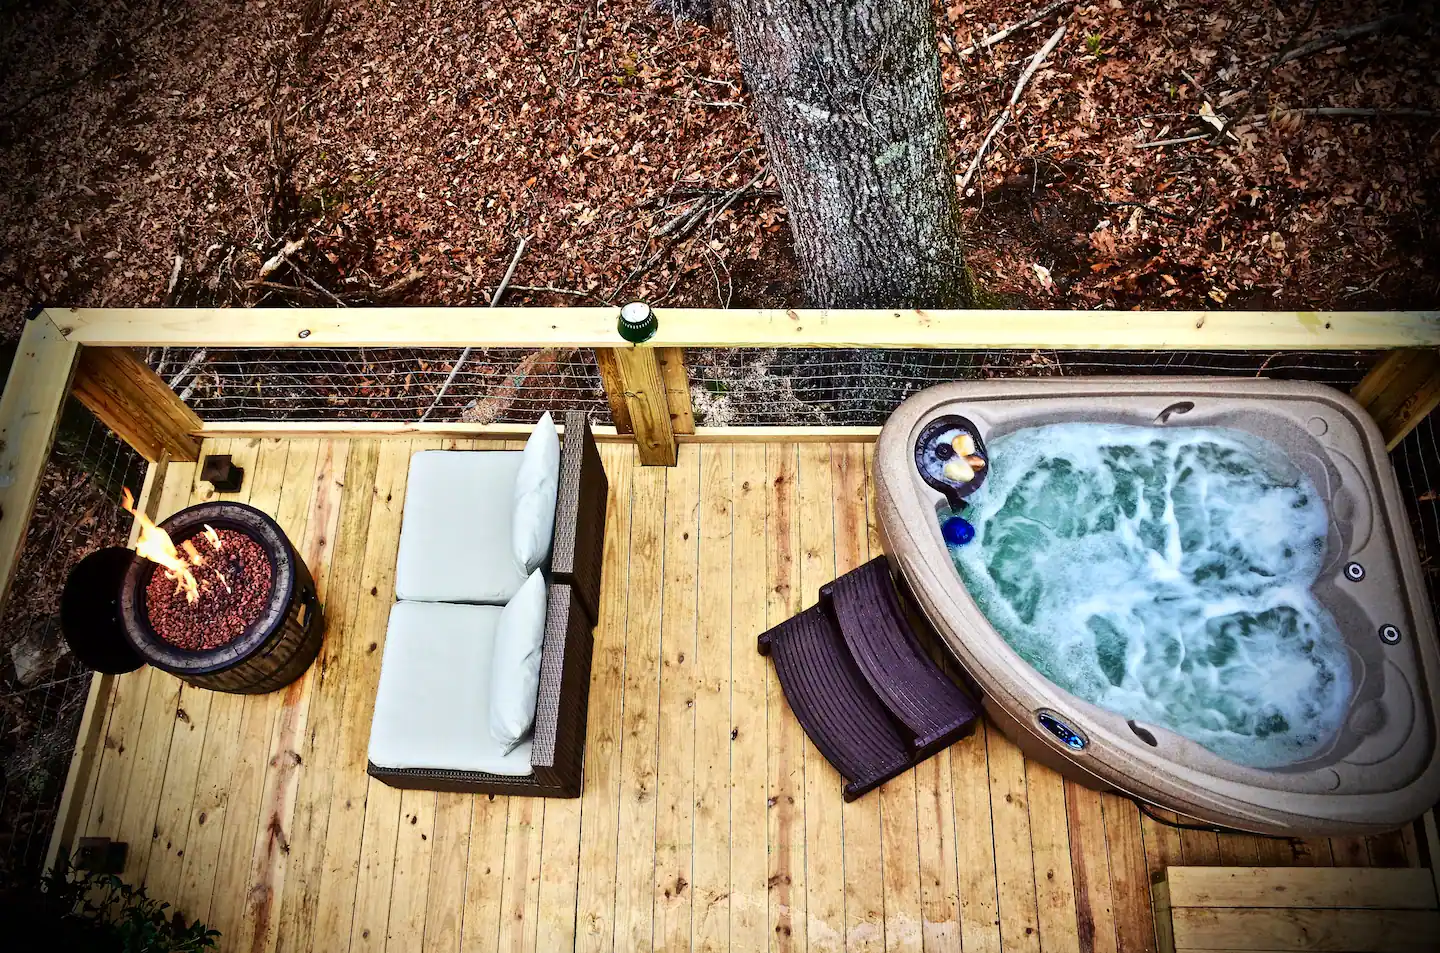 View from above of the hot tub and fire table - ideal for a romantic evening for two.